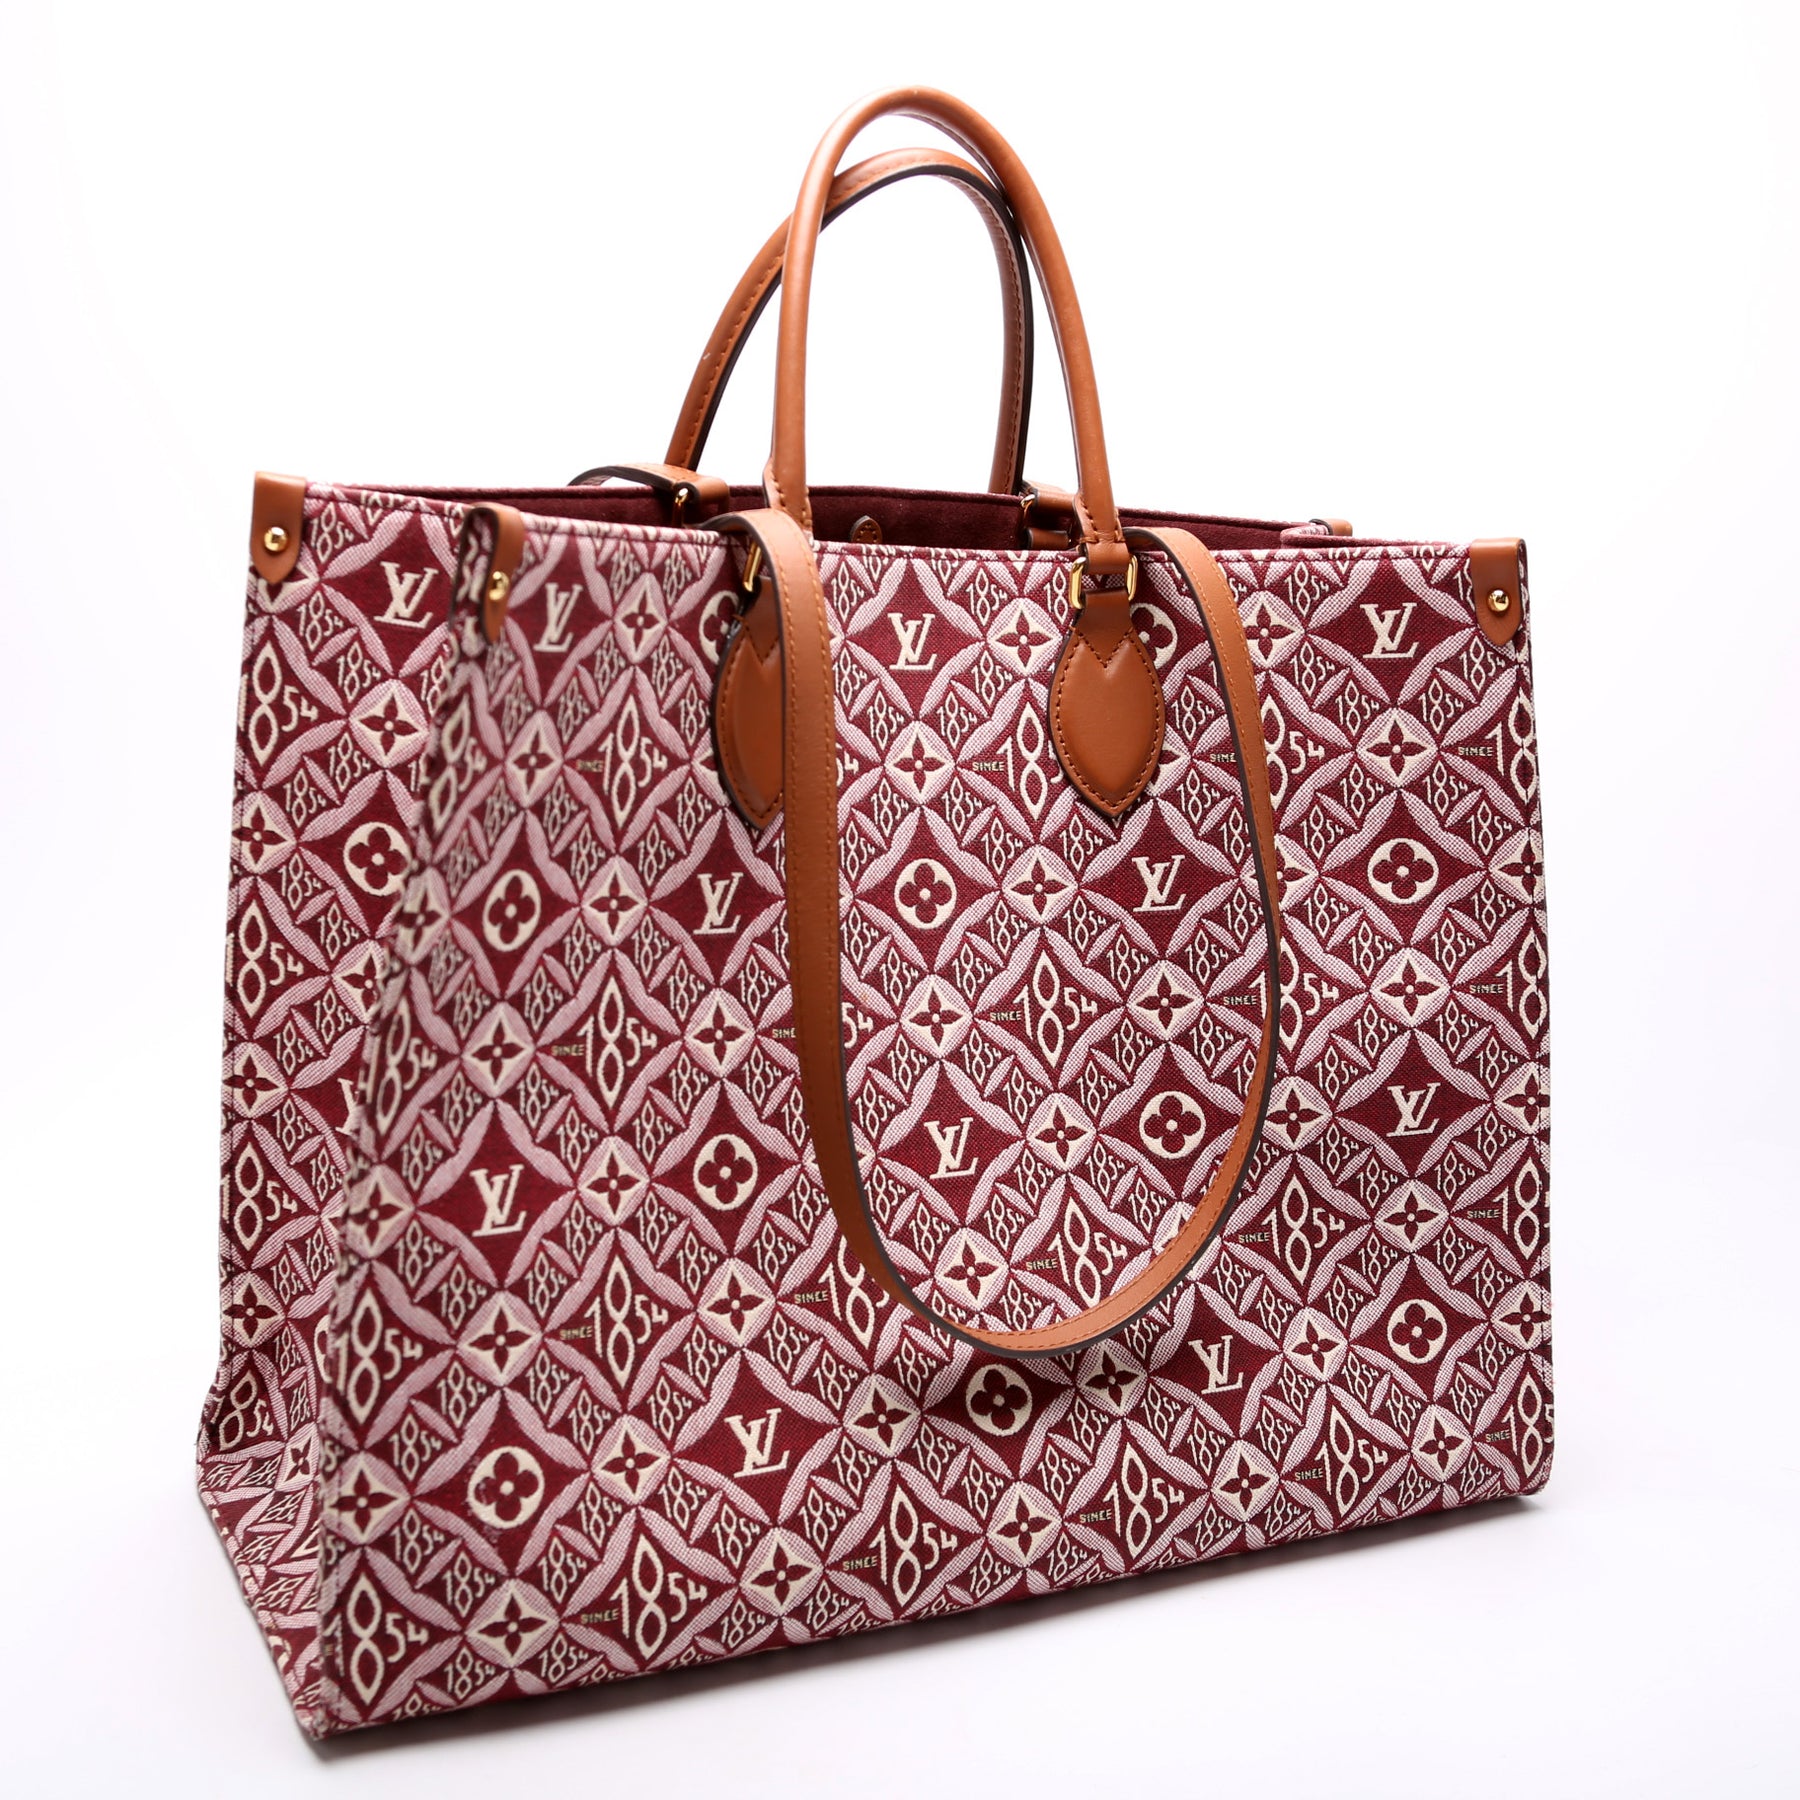 My new favorite Louis Vuitton OnTheGo tote from the new SINCE 1854